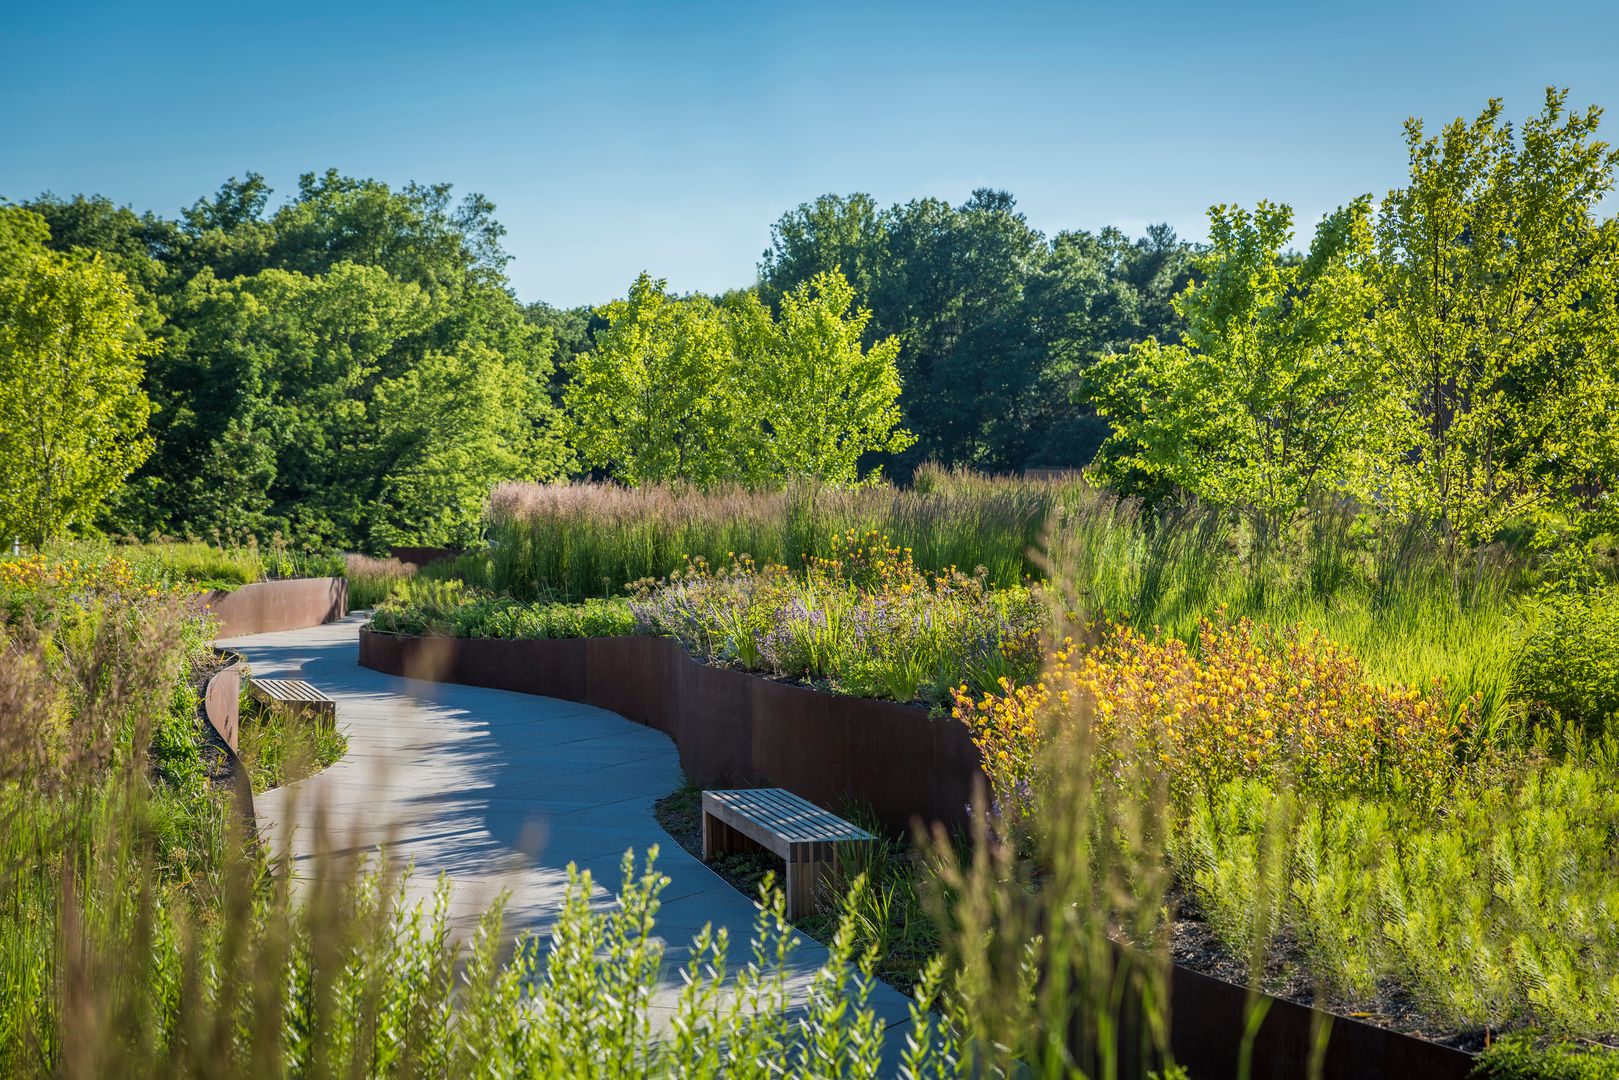 Outdoor garden with public paths, seating, and biophilic natural landscaping